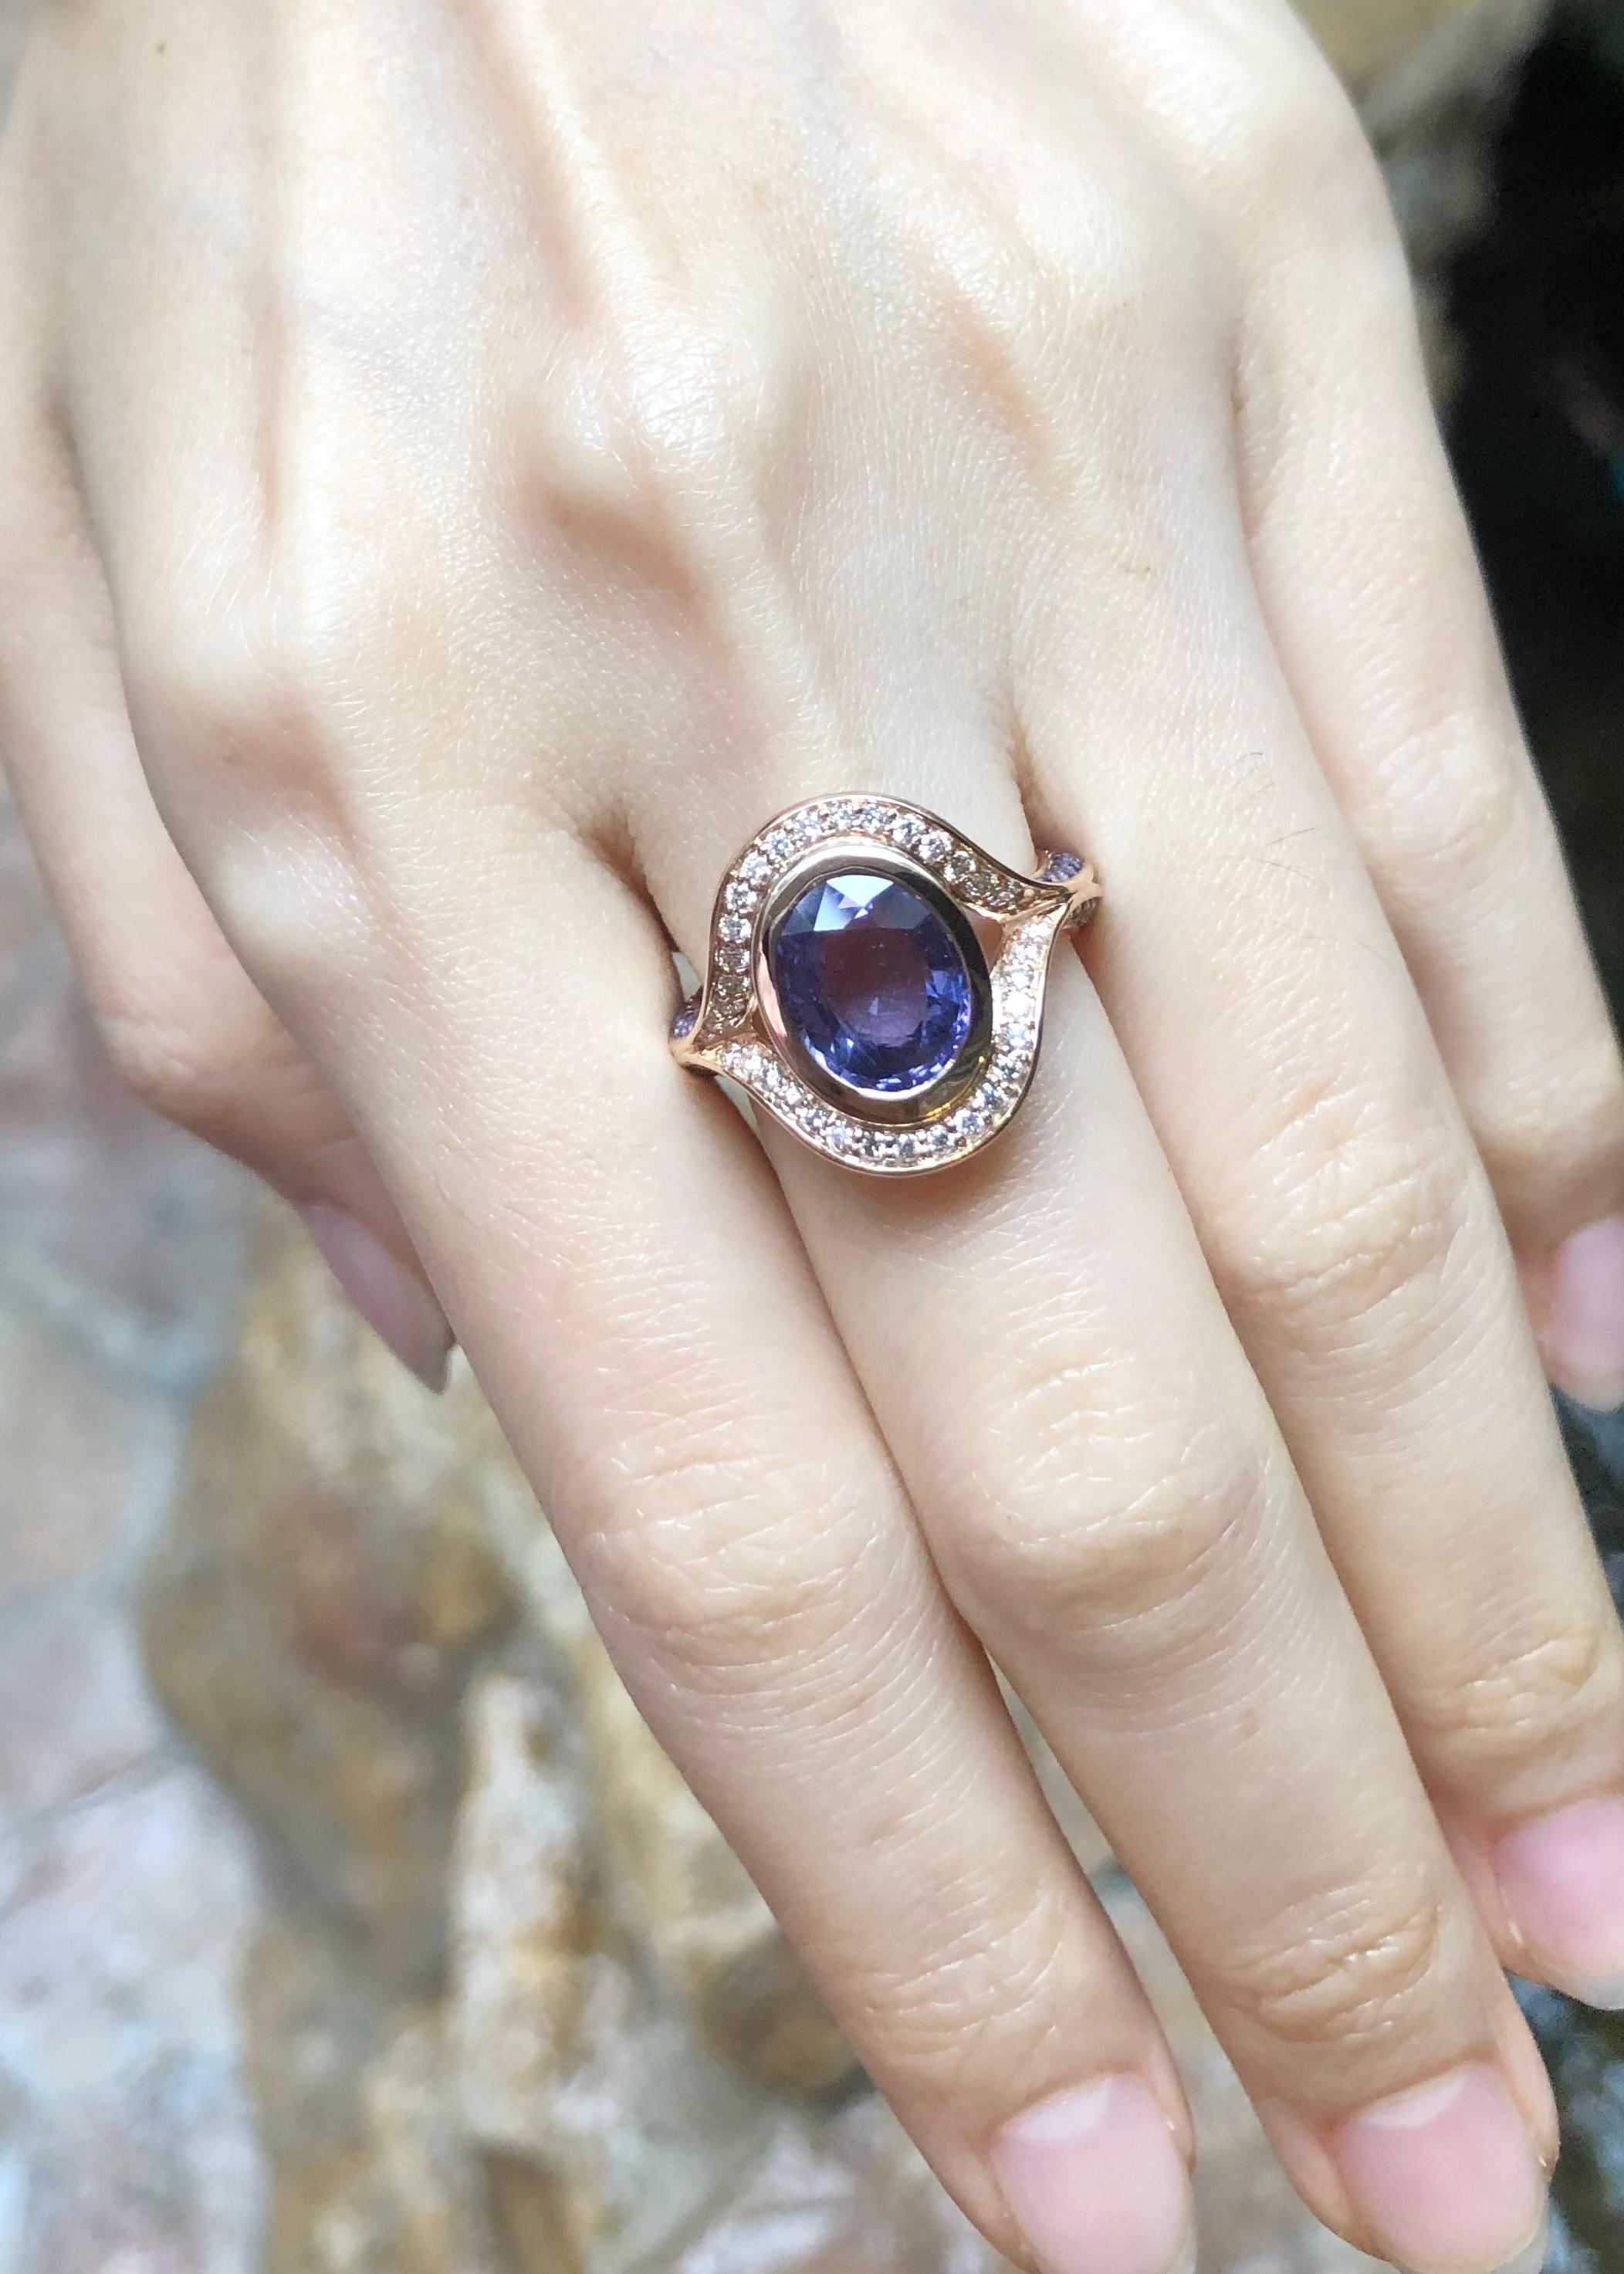 Purple Sapphire 3.18 carats with Purple Sapphire 0.69 carat and Brown Diamond 0.29 carat Ring set in 18K Rose Gold Settings

Width:  1.7 cm 
Length: 1.7 cm
Ring Size: 53
Total Weight: 8.07 grams

